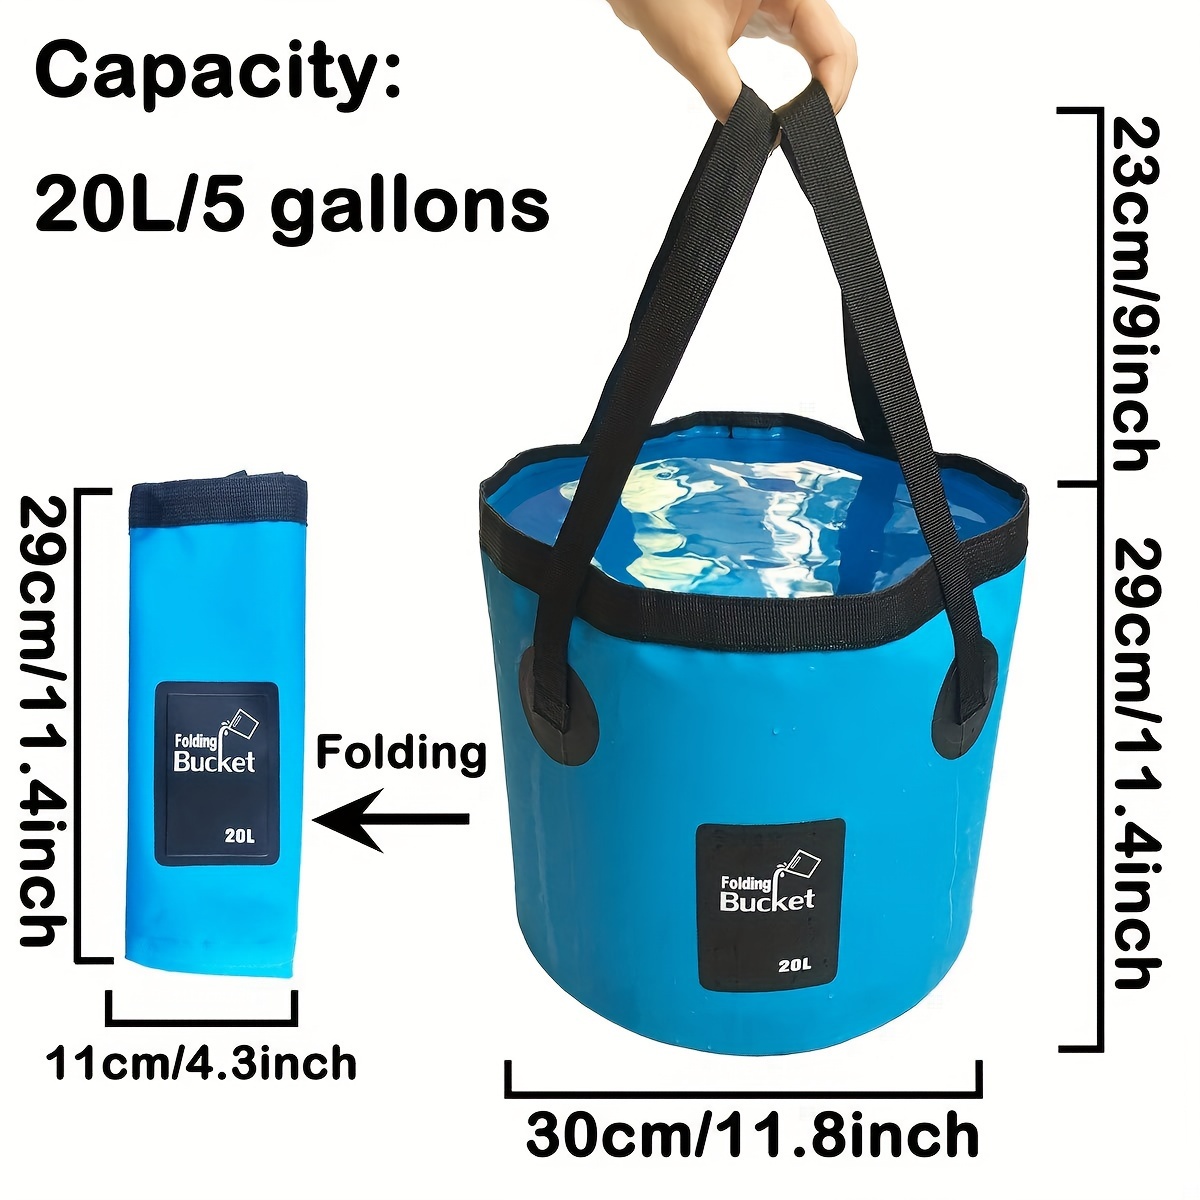 AUTODECO 3 Pack Collapsible Bucket 5 Gallon Container Folding Water Bucket Portable Wash Basin for Outdoor Travelling Camping Fishing Gardening Car